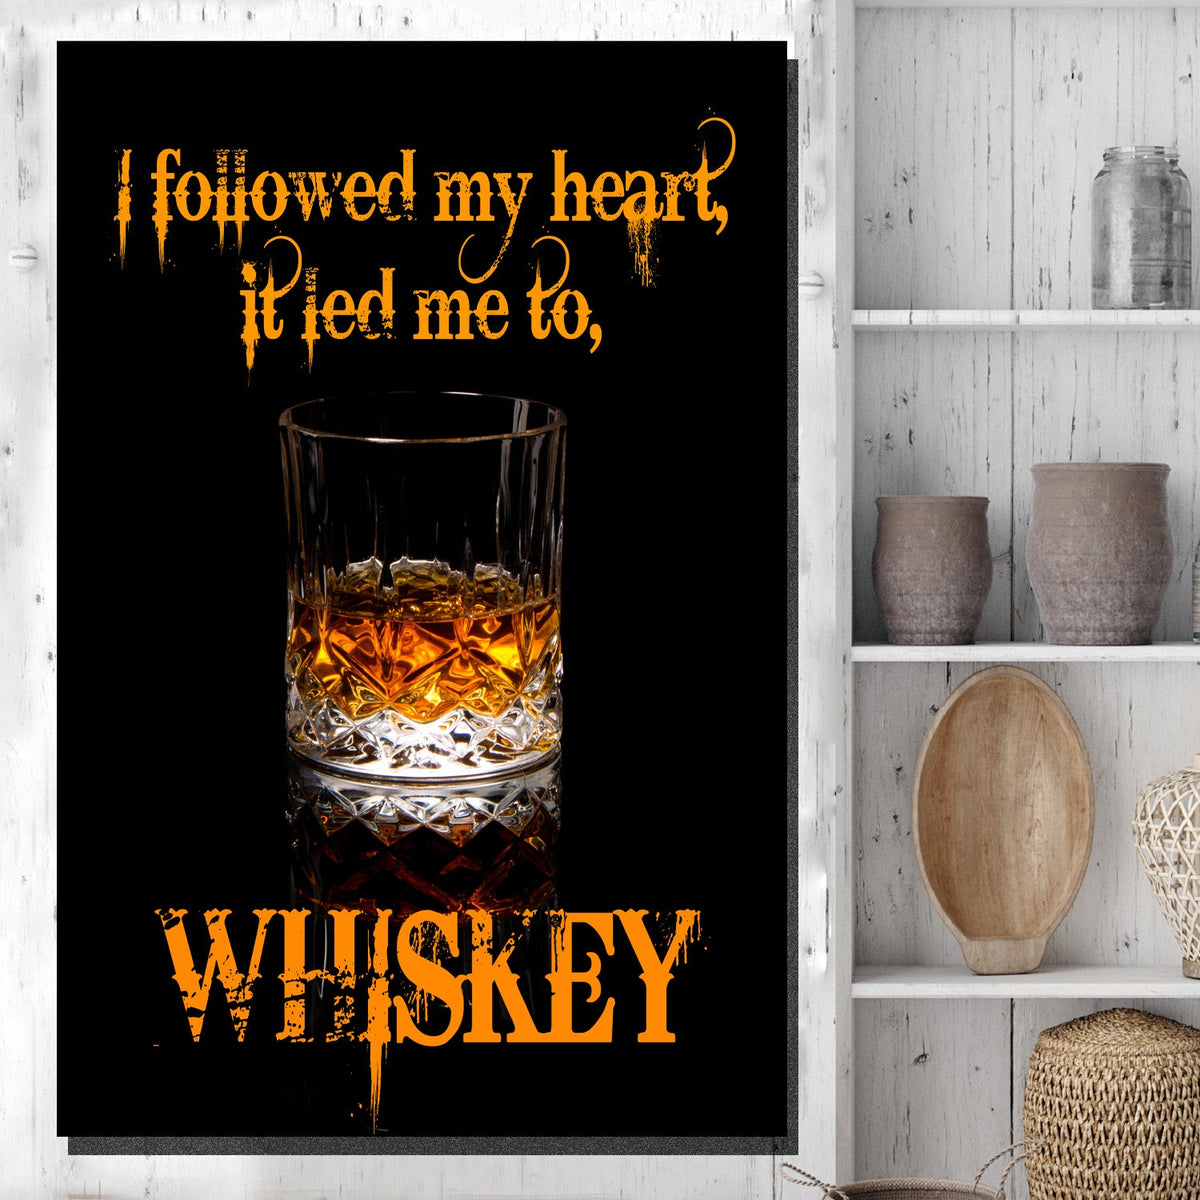 https://cdn.shopify.com/s/files/1/0387/9986/8044/products/WhiskeyQuoteCanvasArtprintStretched-1.jpg